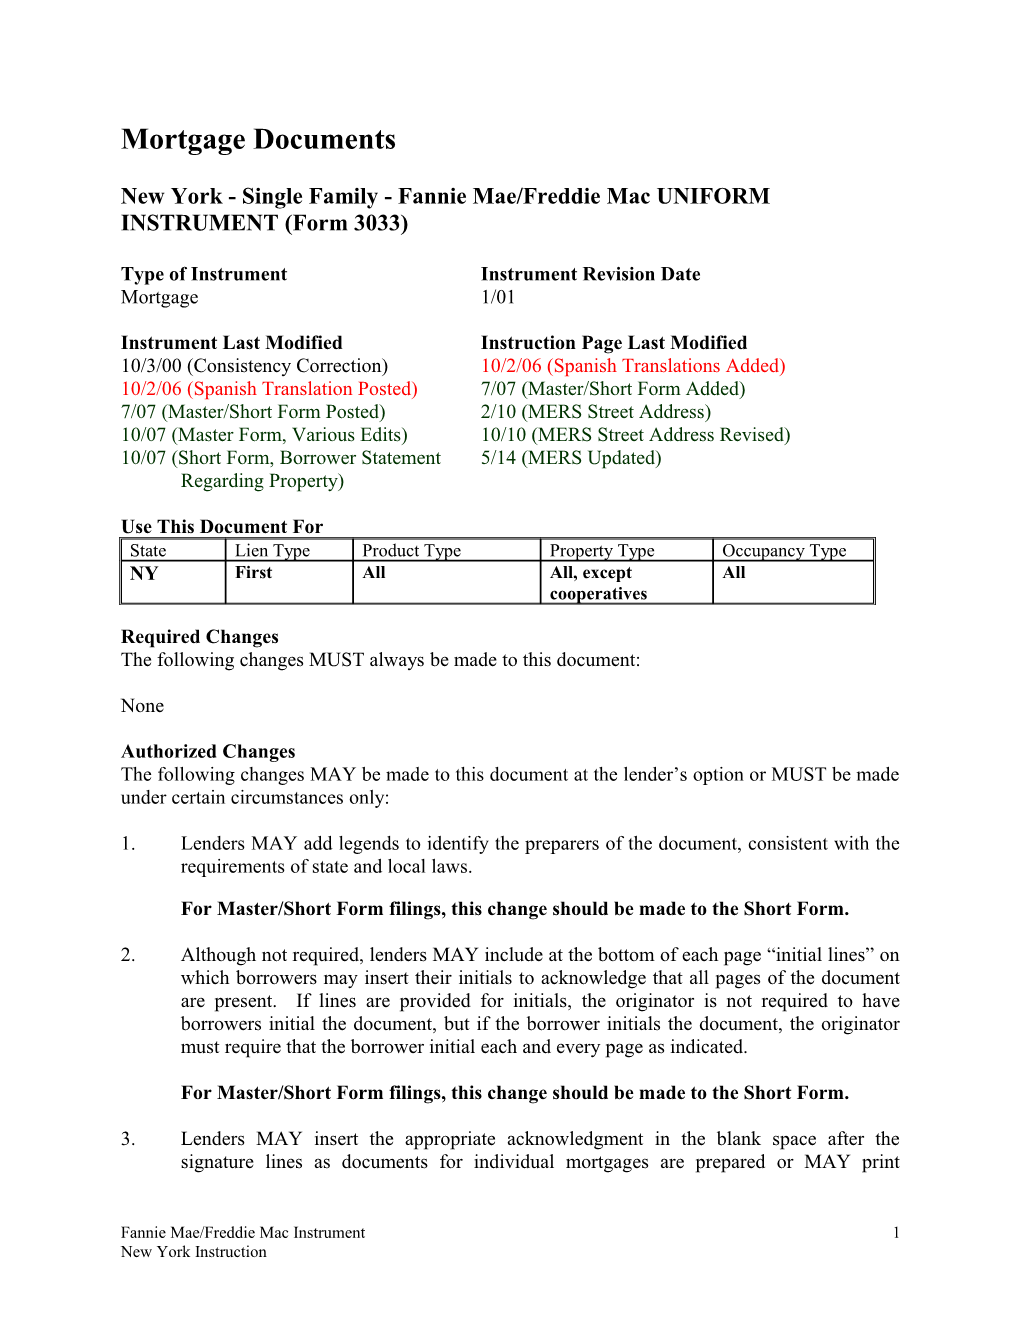 Instructions: New York Security Instrument (Form 3033)